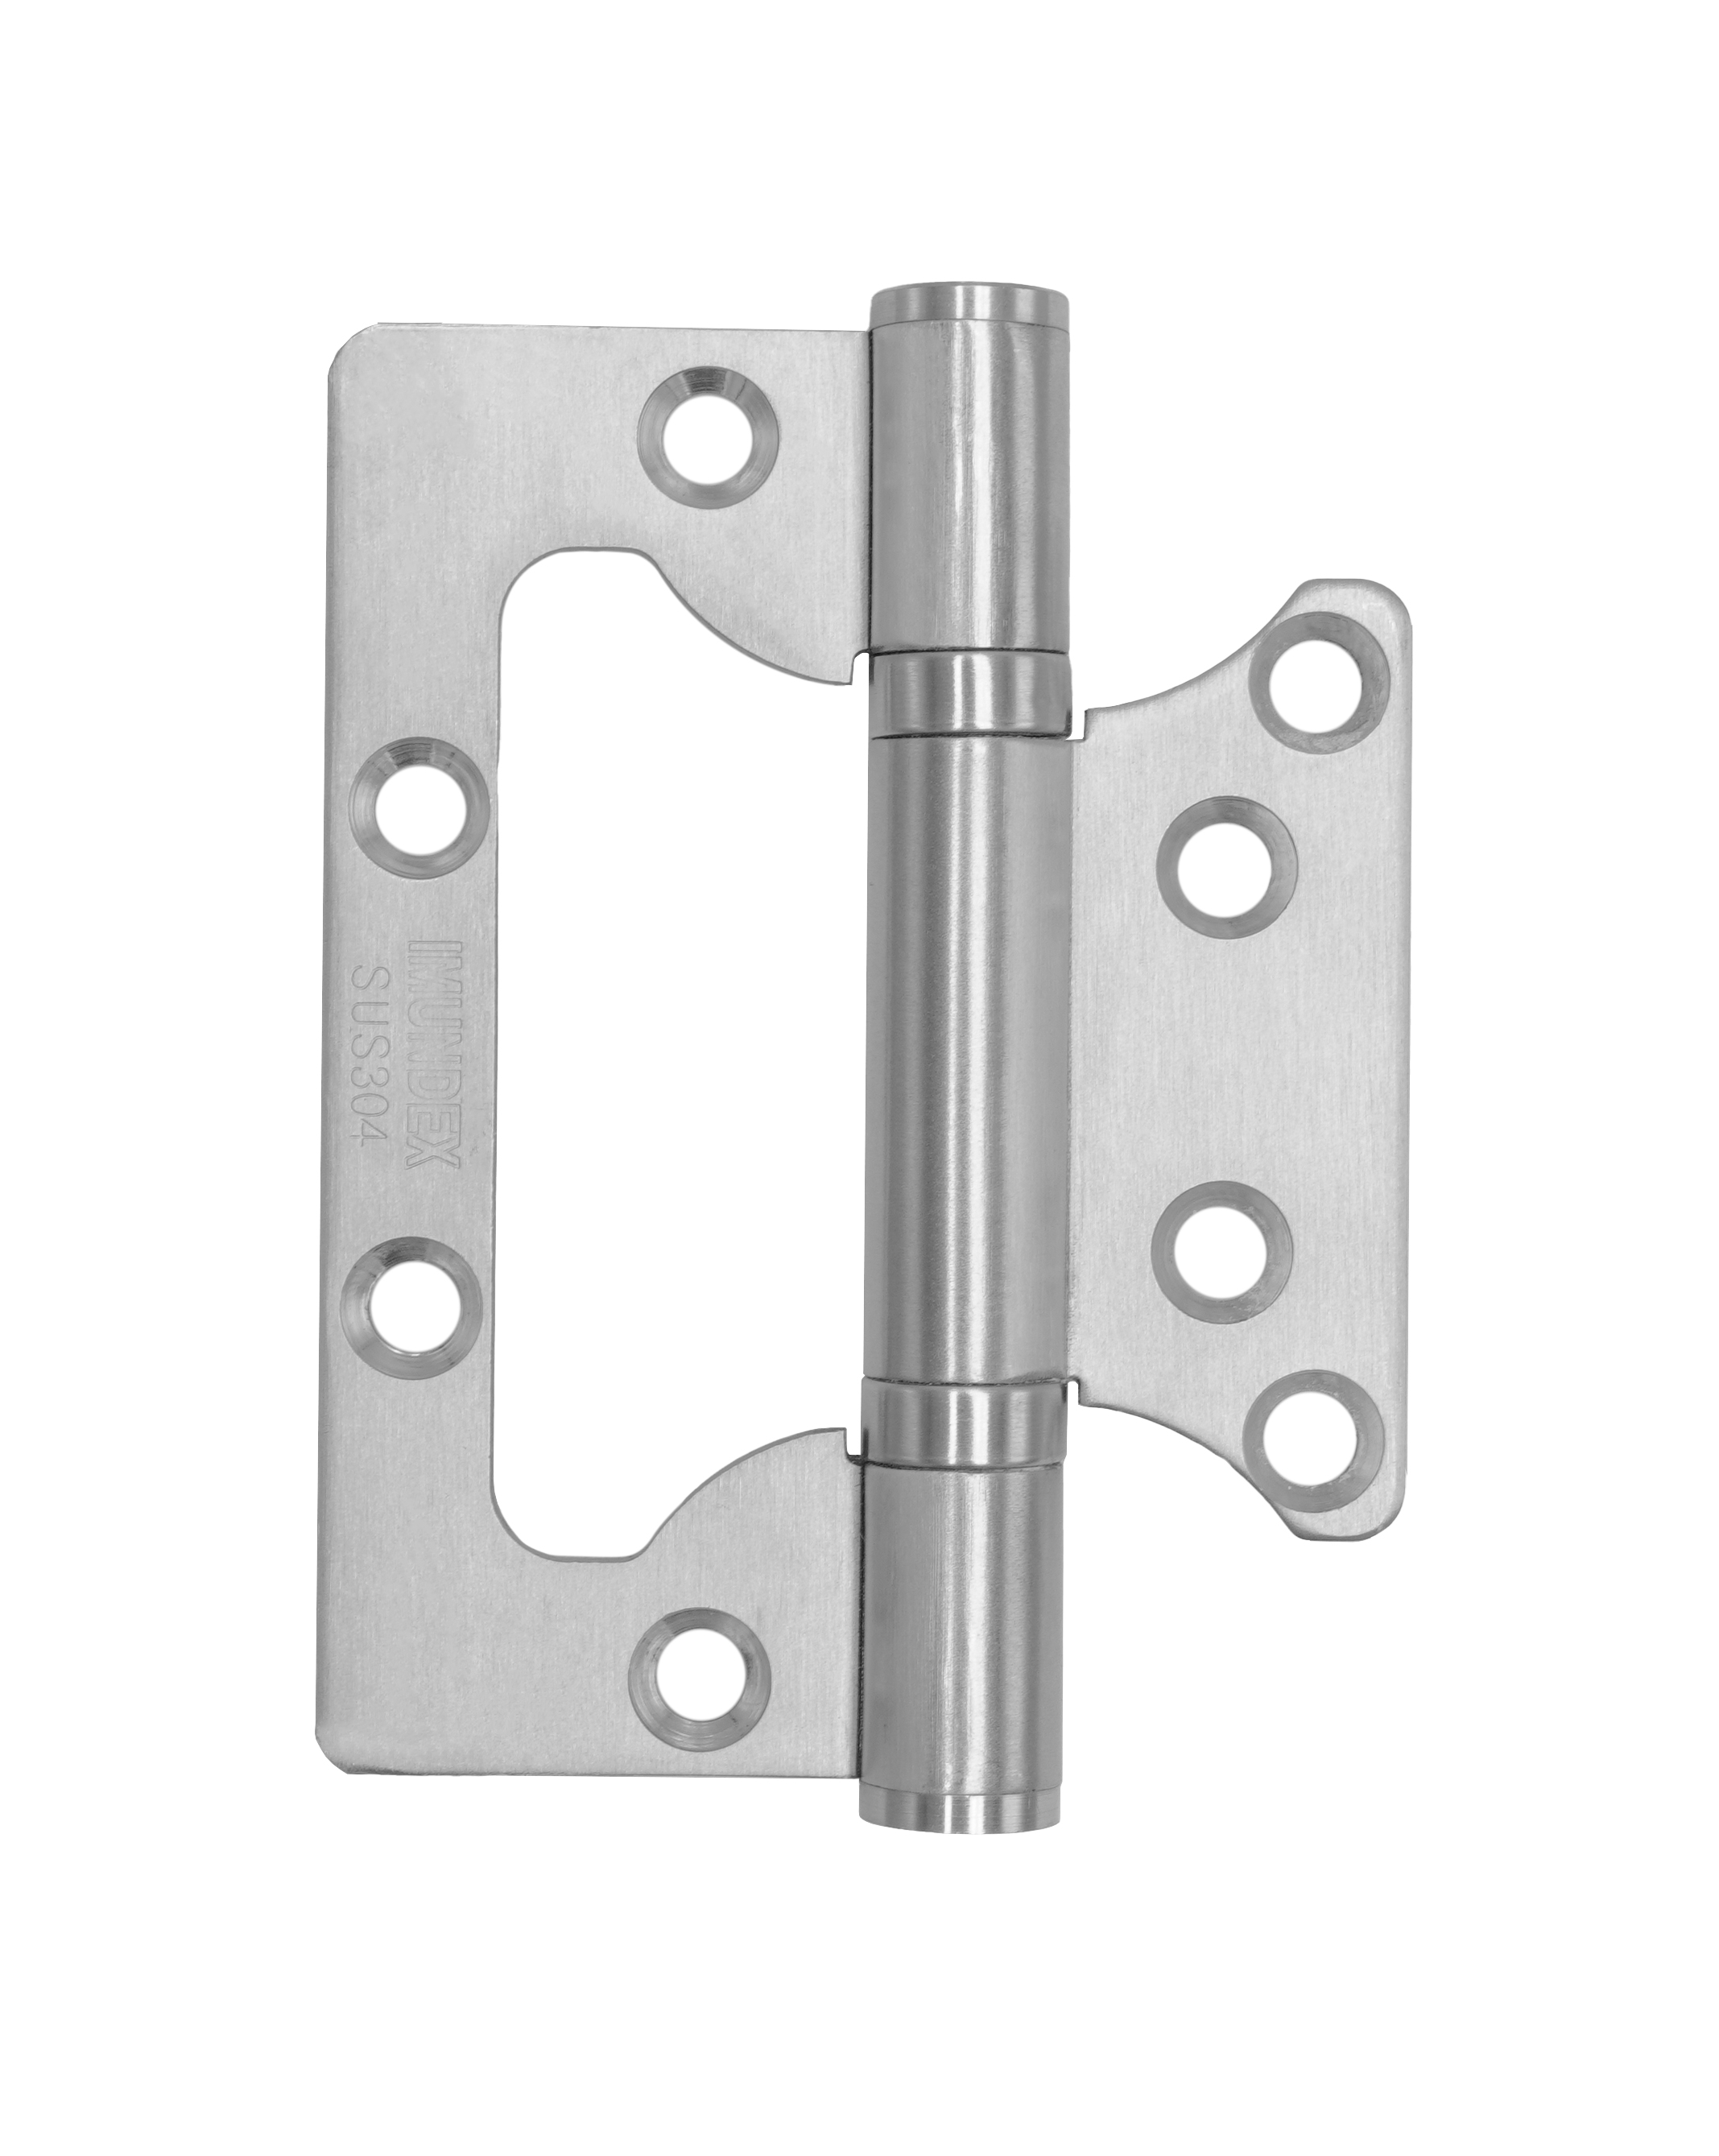 Flush hinge with small size